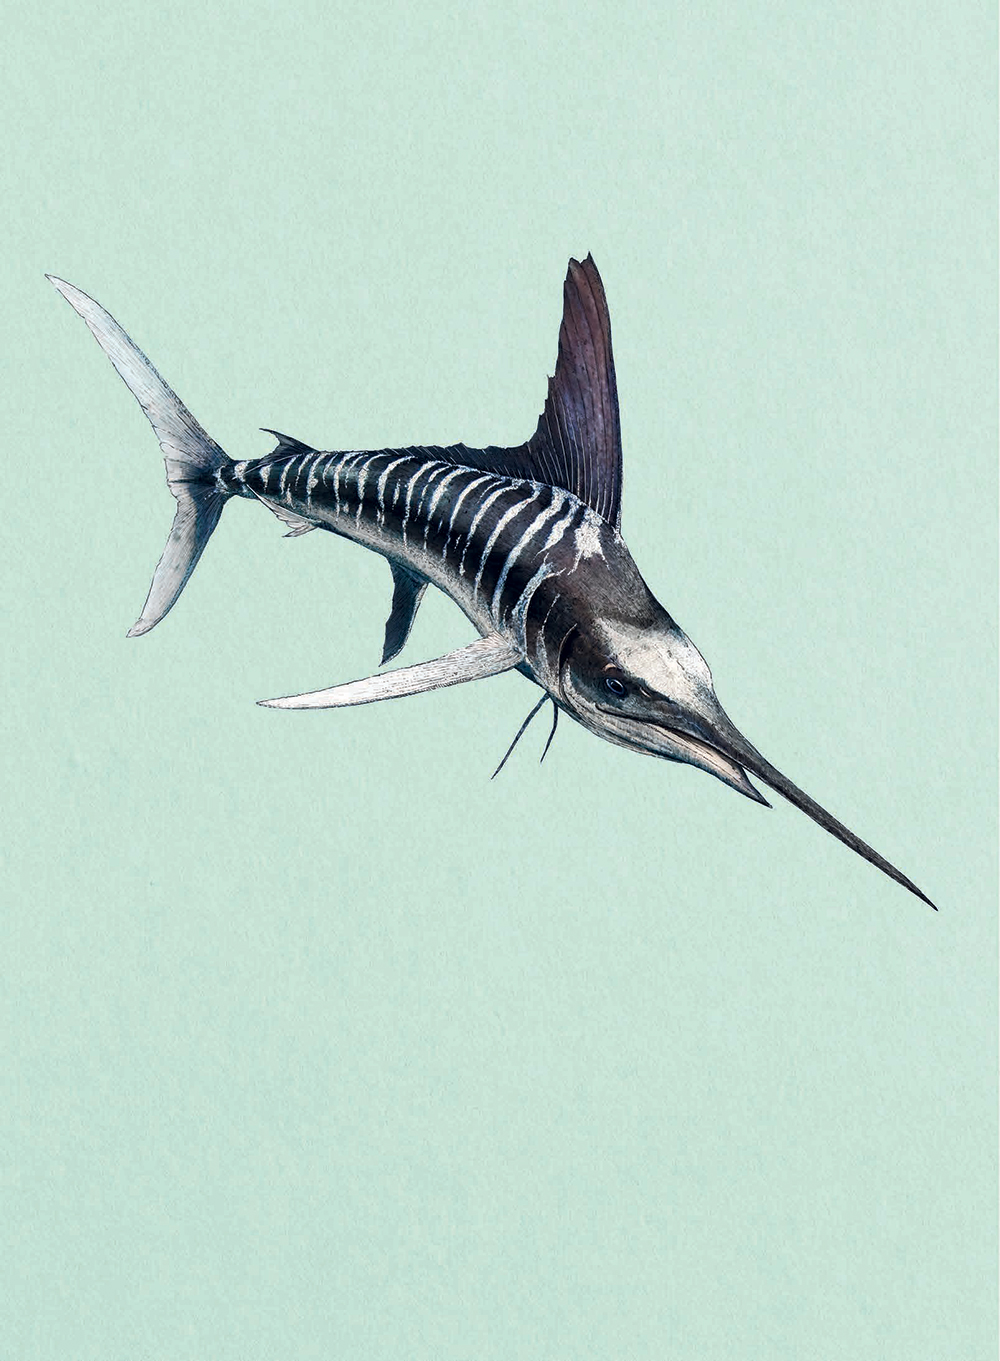 Striped marlin by Ben Rothery in Water World